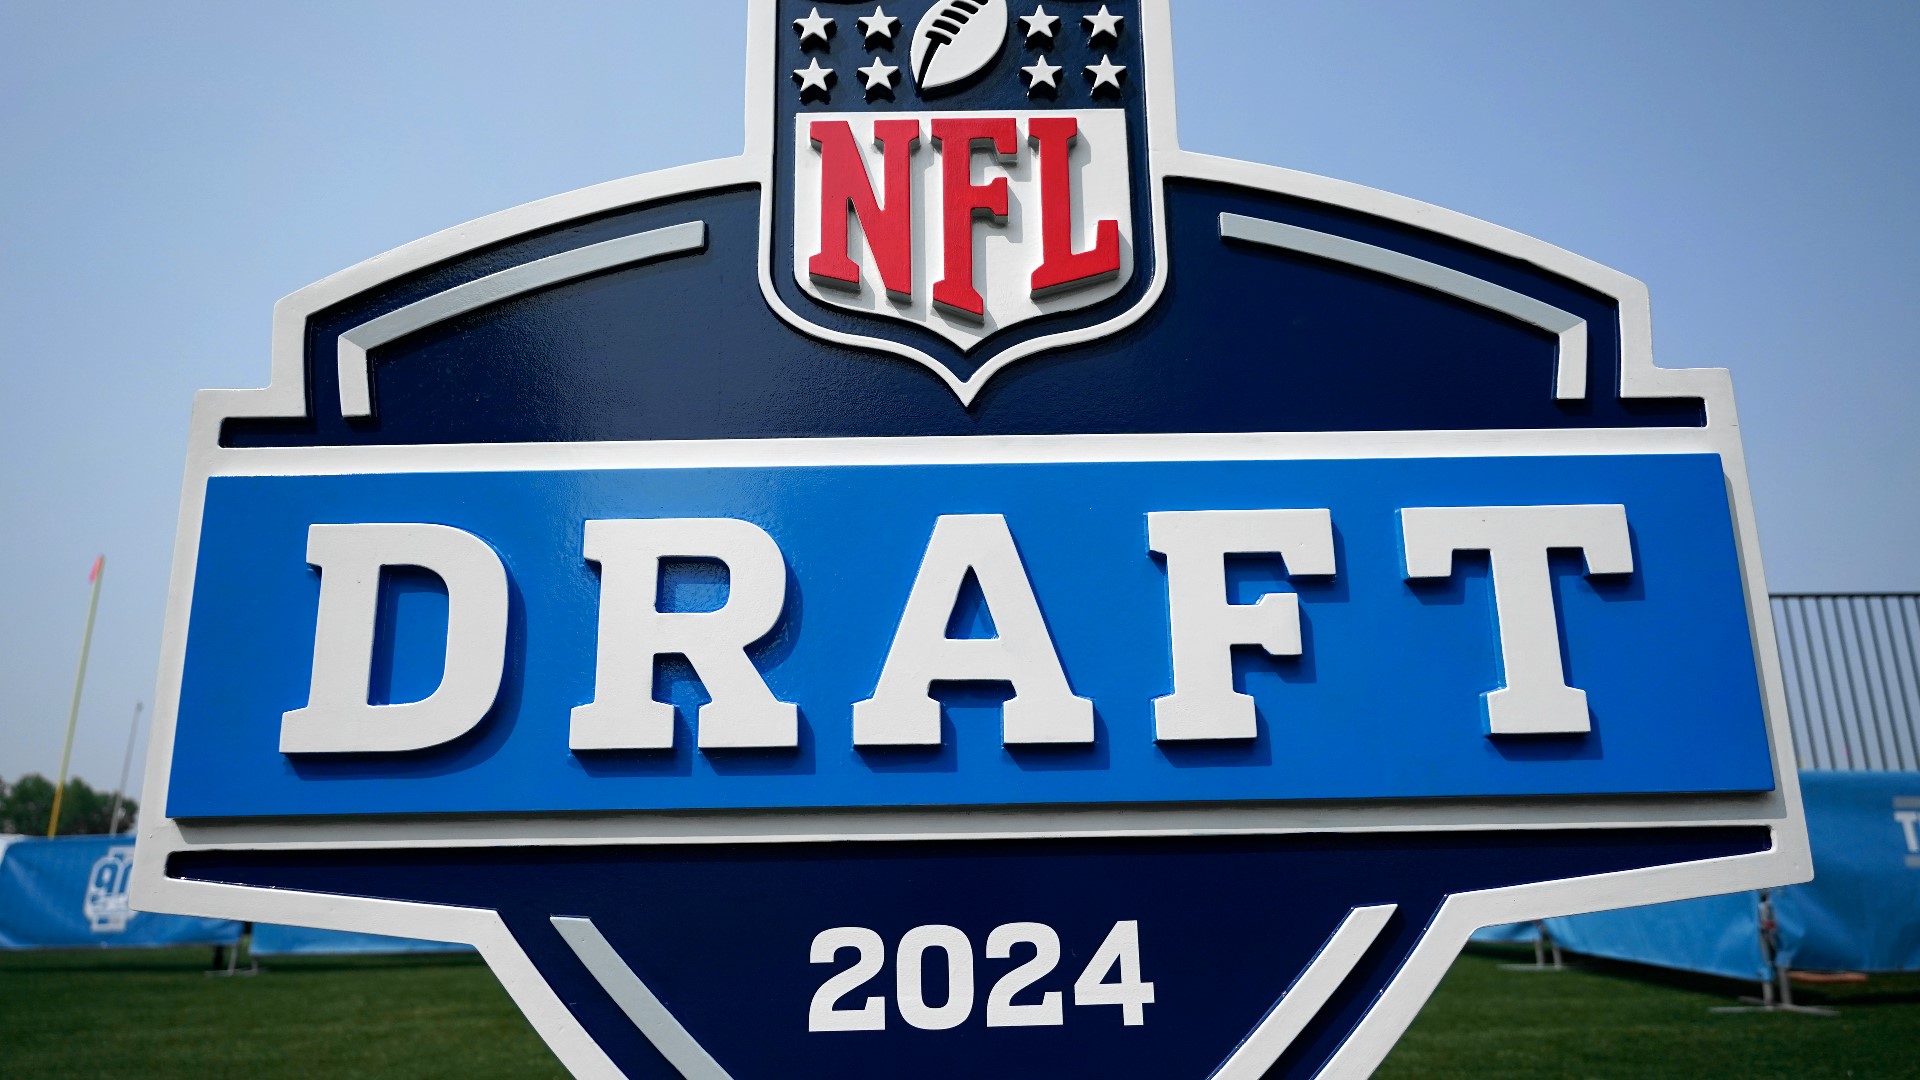 Locked On Steelers host Cris Carter broke down Pittsburgh's needs heading into the 2024 NFL Draft.